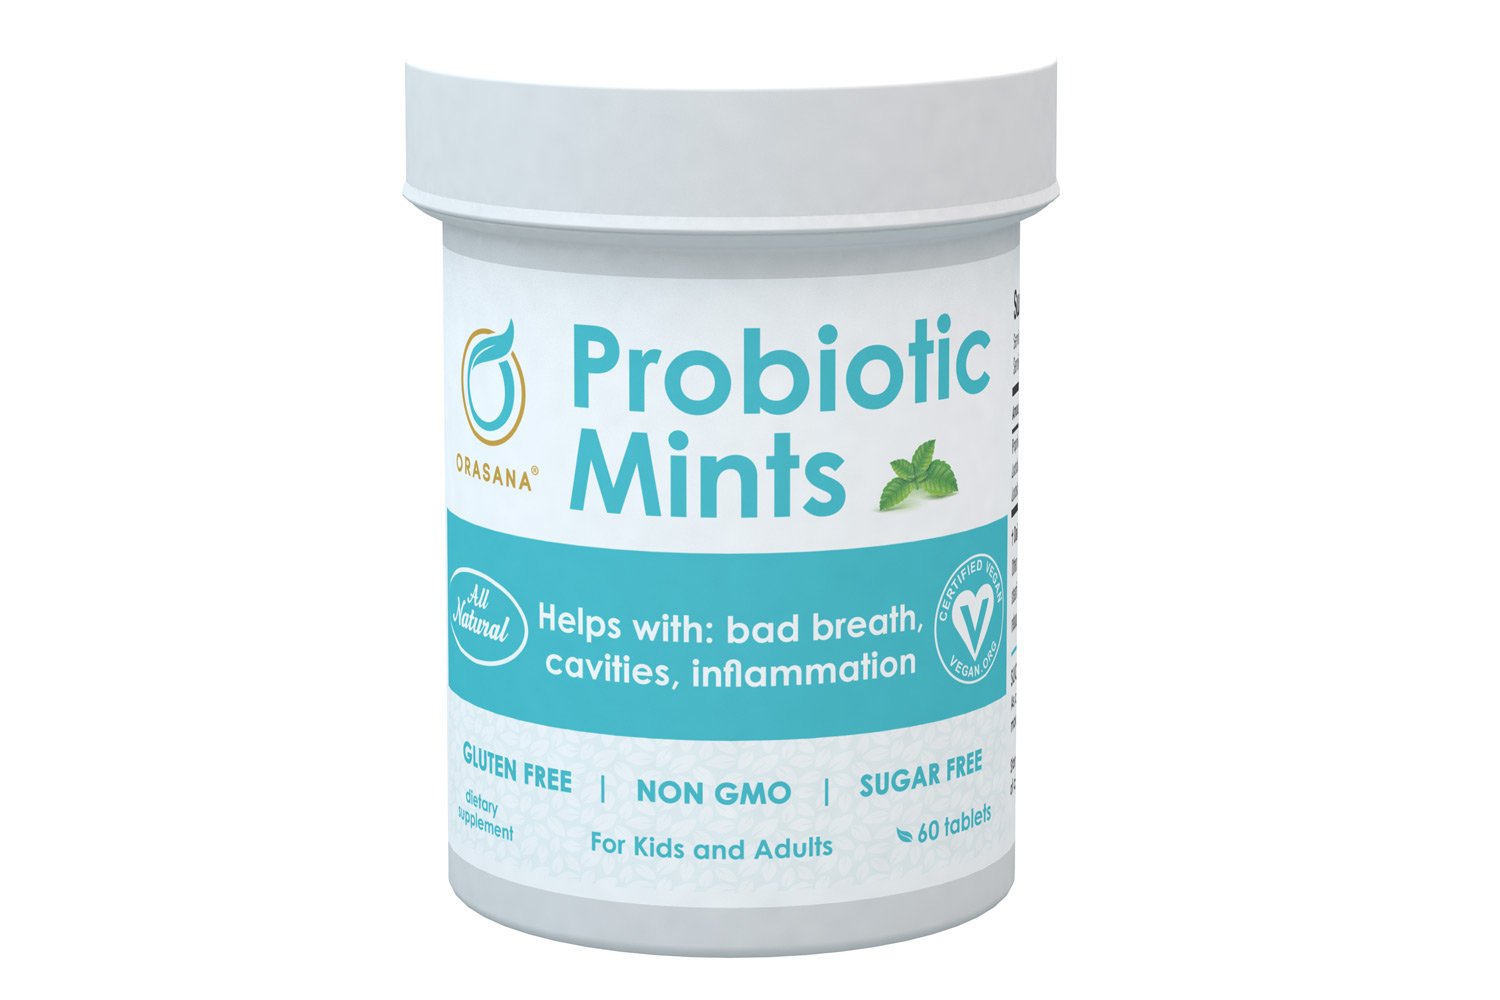 2023 The best Probiotics product that can help prevent cavities, reduce bad breath, and inflammation while also promoting airway and gut health.